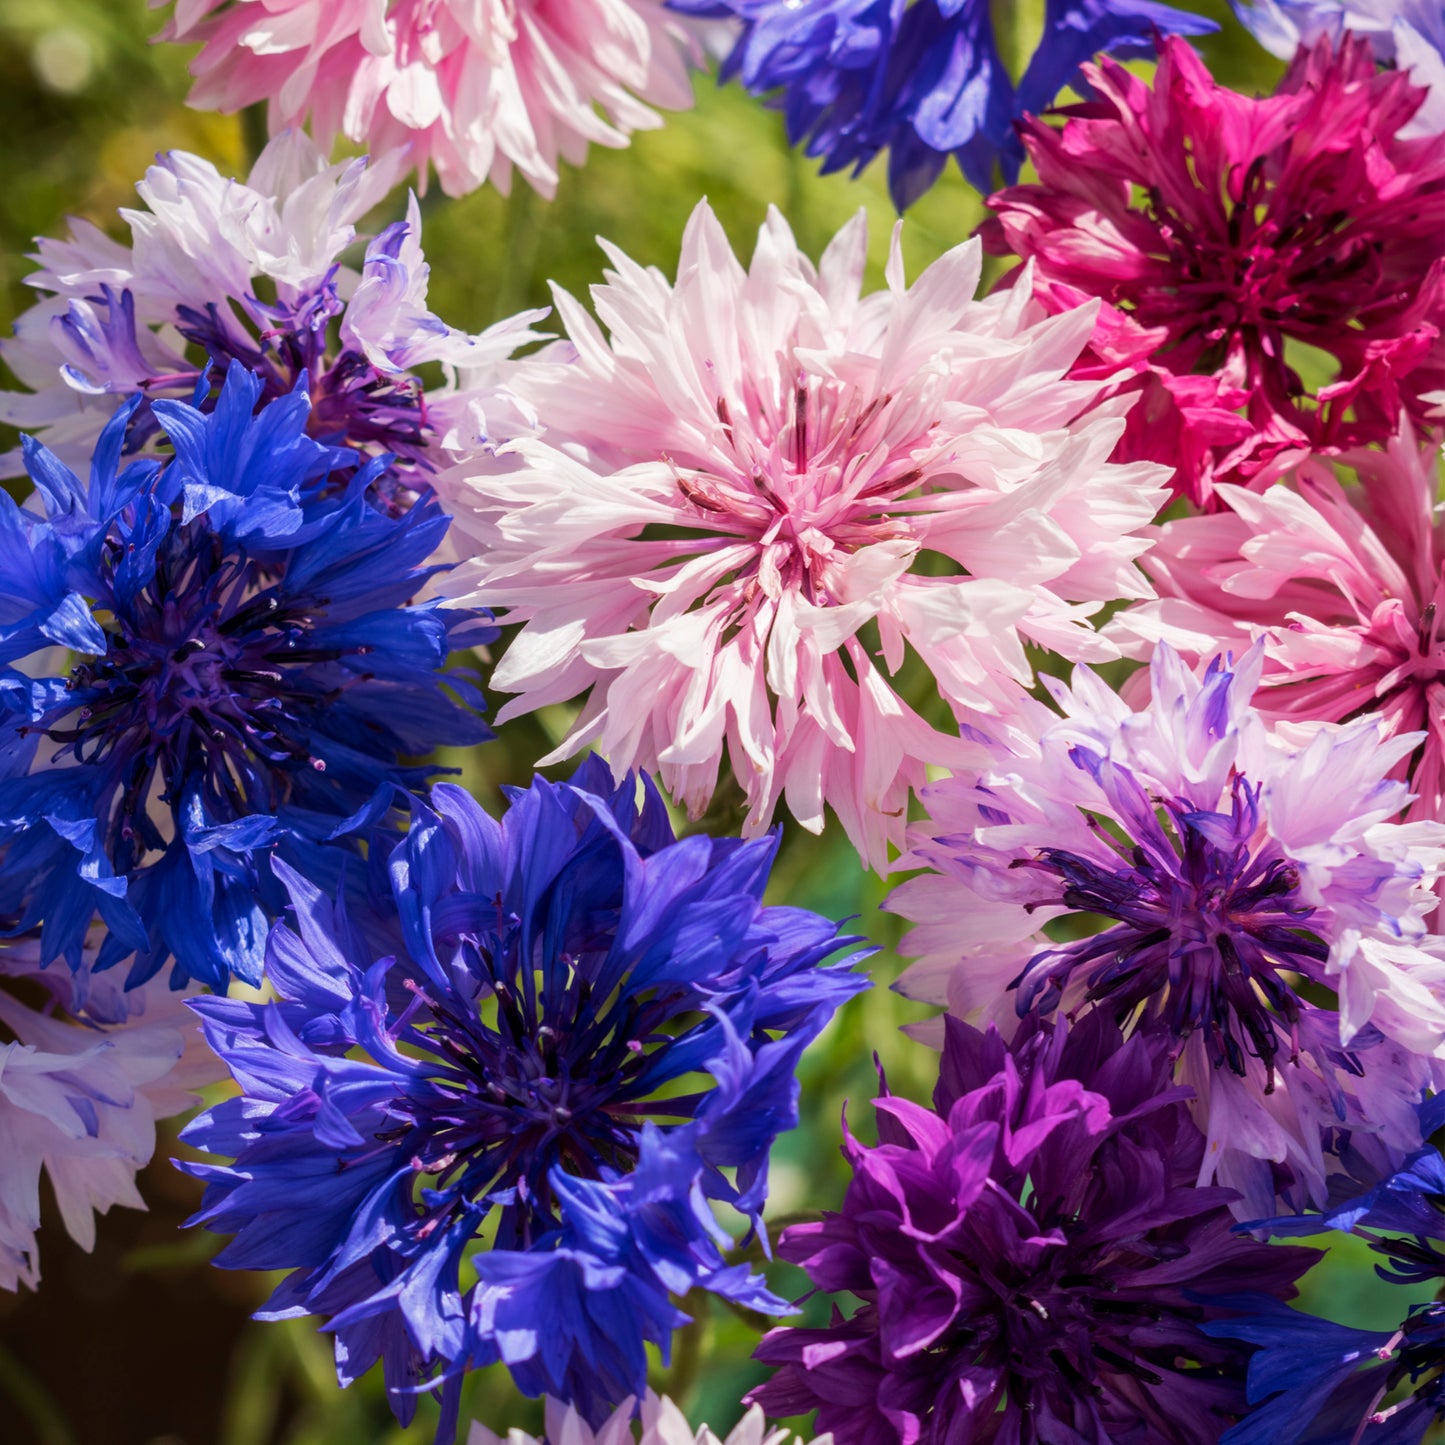 Cyanus Double Mixed Colors Bachelor Button flower seeds fully grown and blooming in shades of pink, blue, purple and white. Ferry Morse